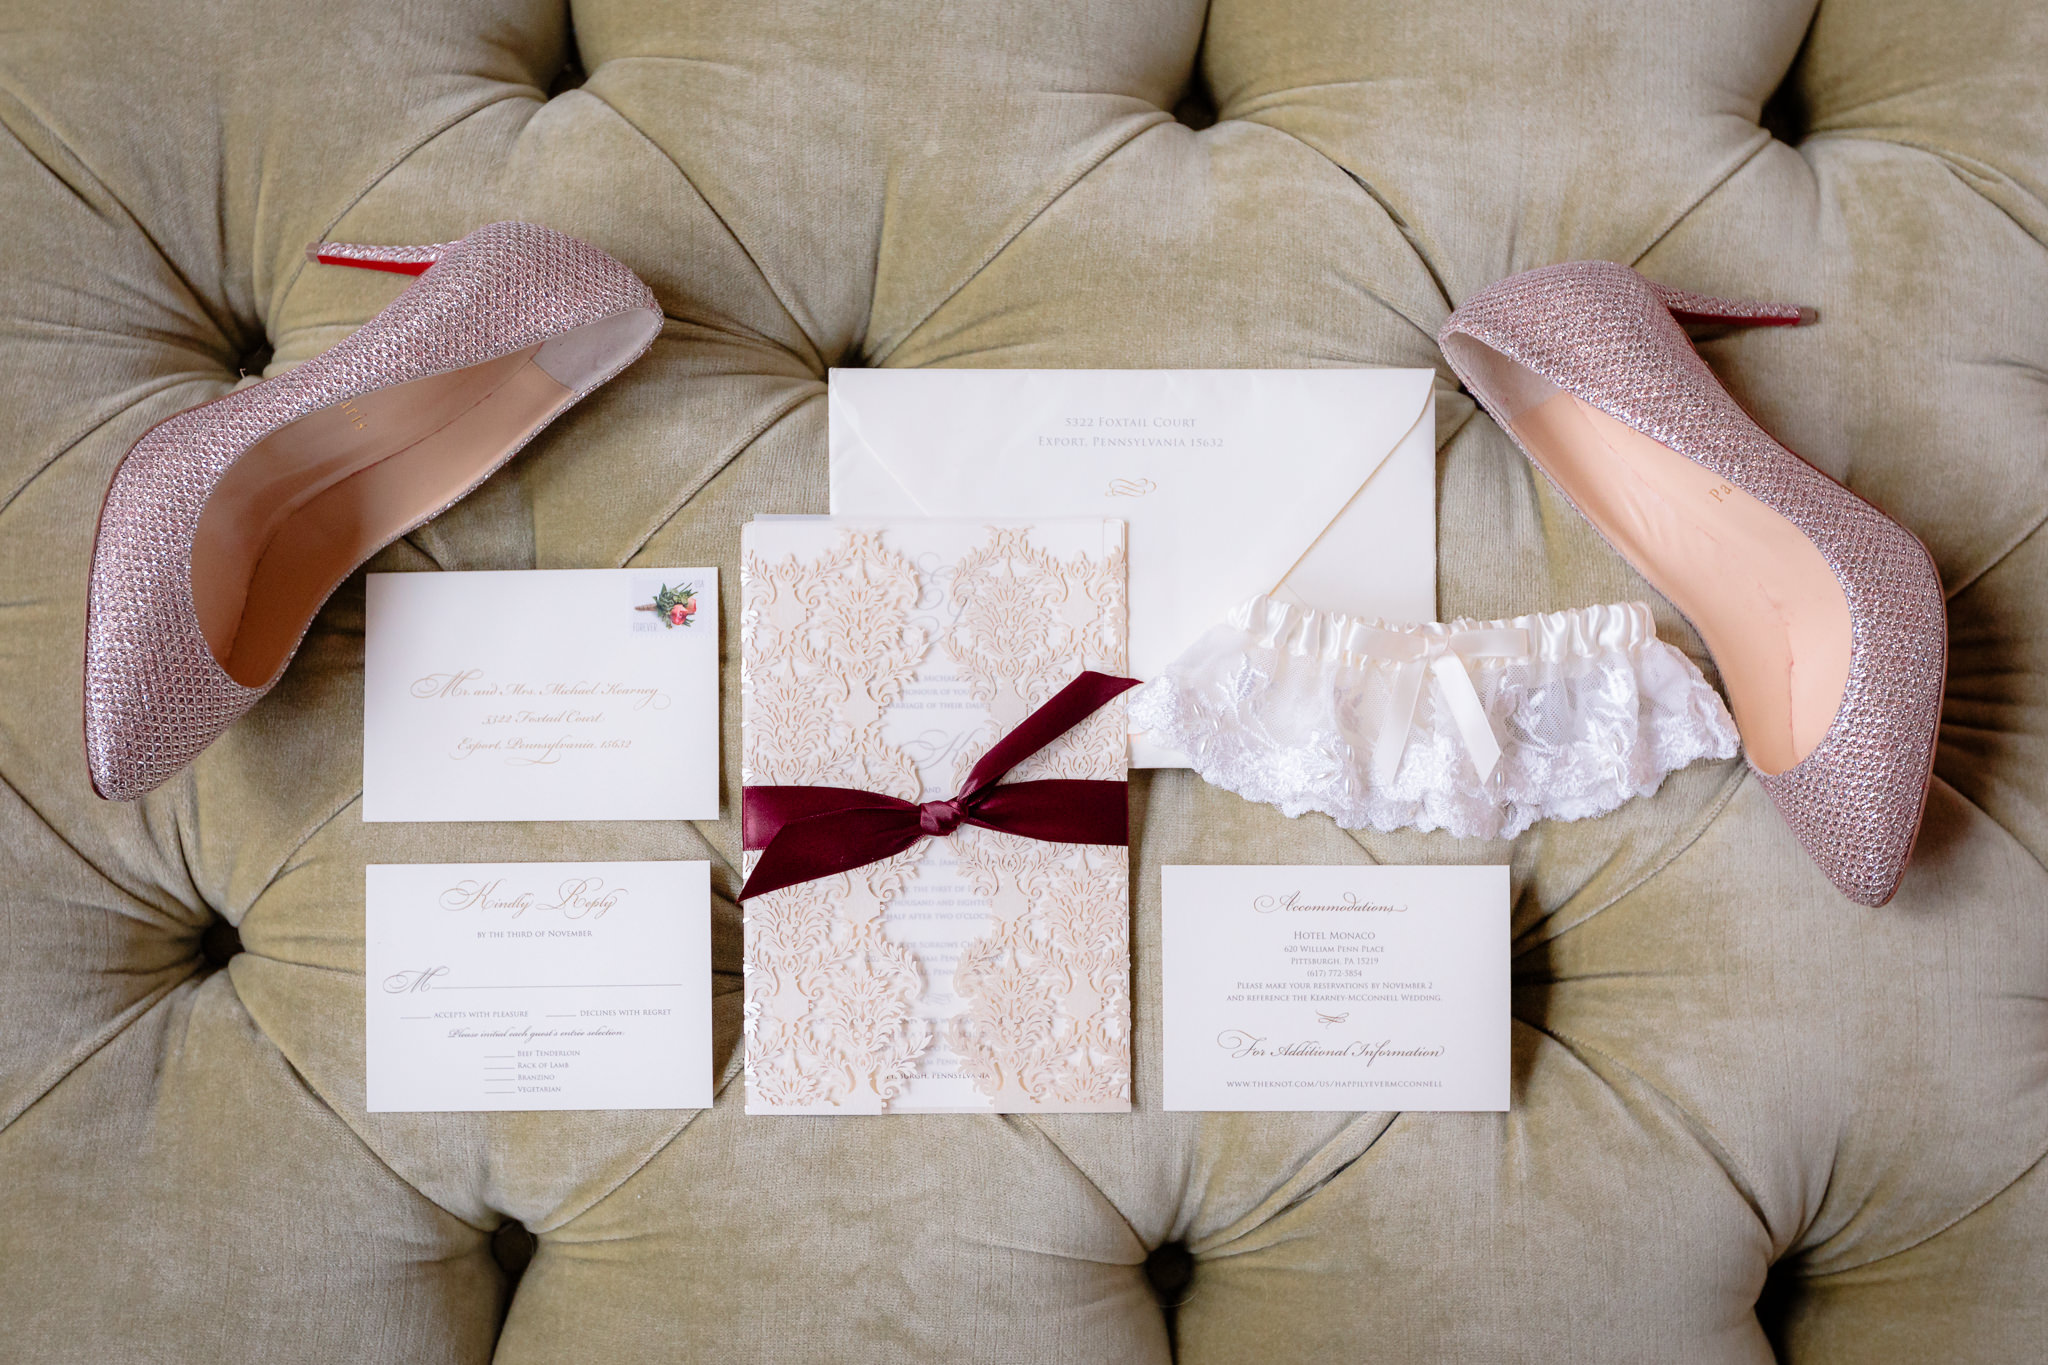 Custom invitation suite by More Than Words in Pittsburgh, PA in a flat lay with Louboutin heels